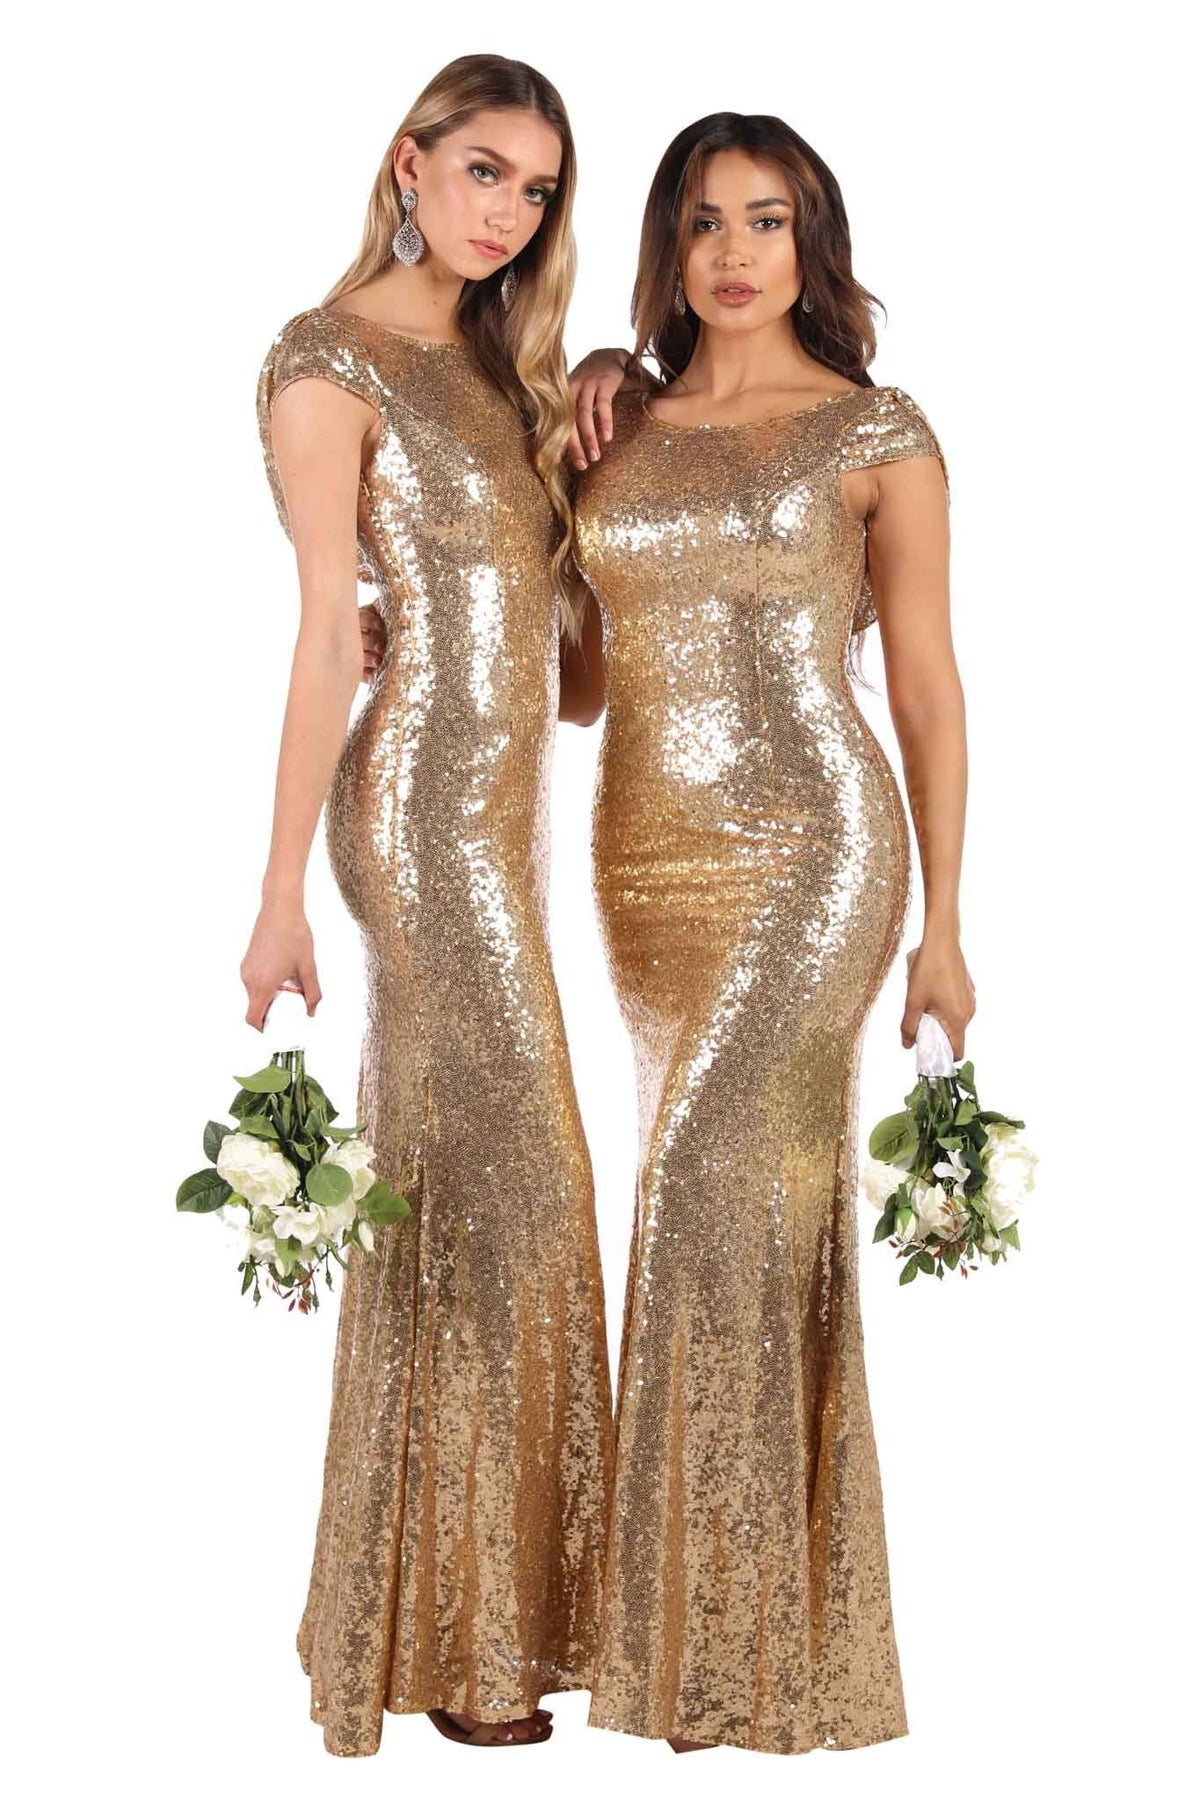 Gold Sequin Bridesmaid Maxi Dress with Boat Neckline and Cowl Back Design